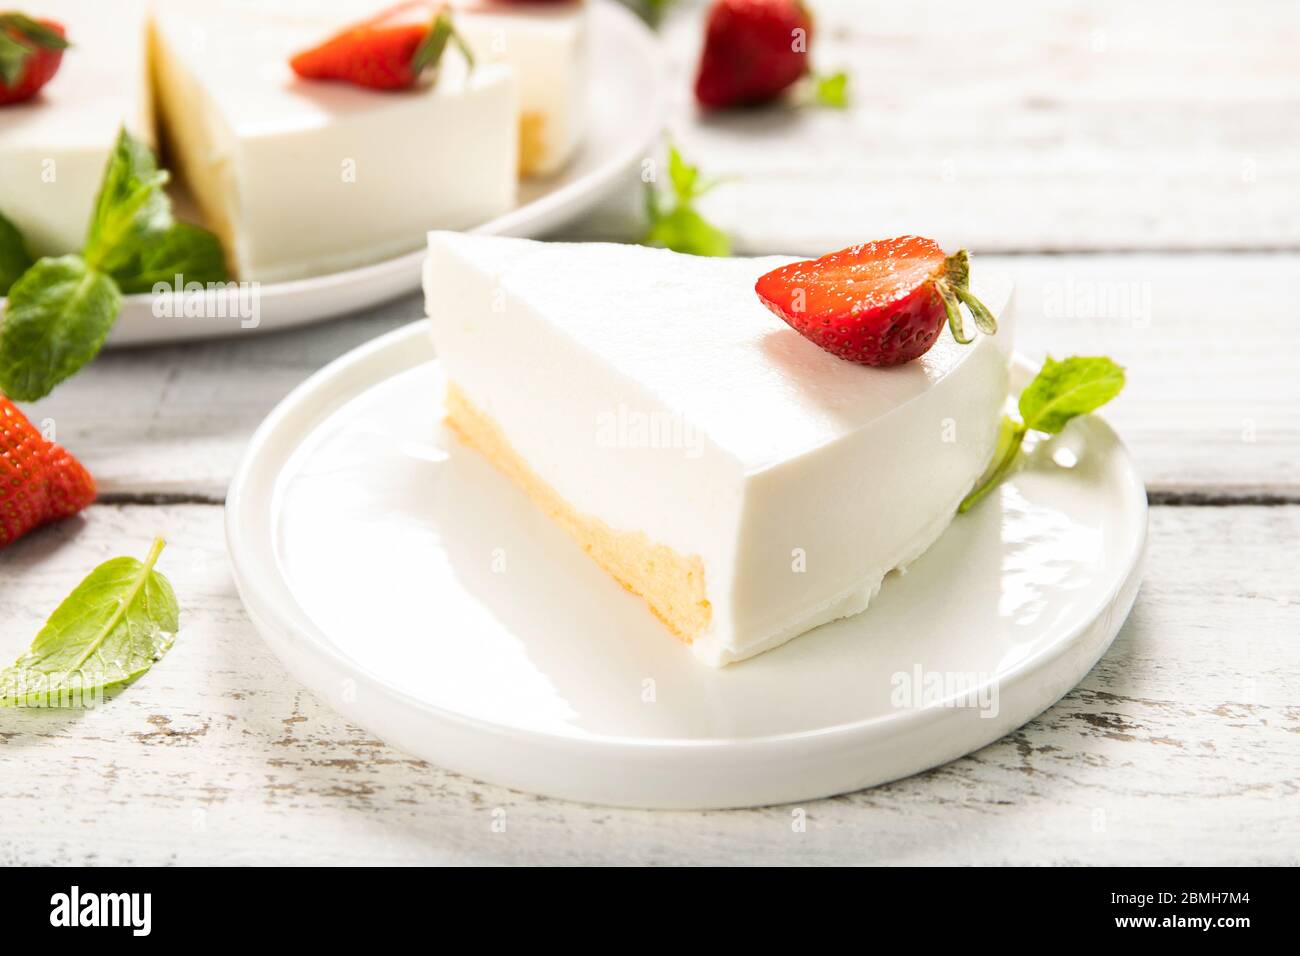 Homemade cheesecake with strawberries on a wooden background. Close-up Stock Photo